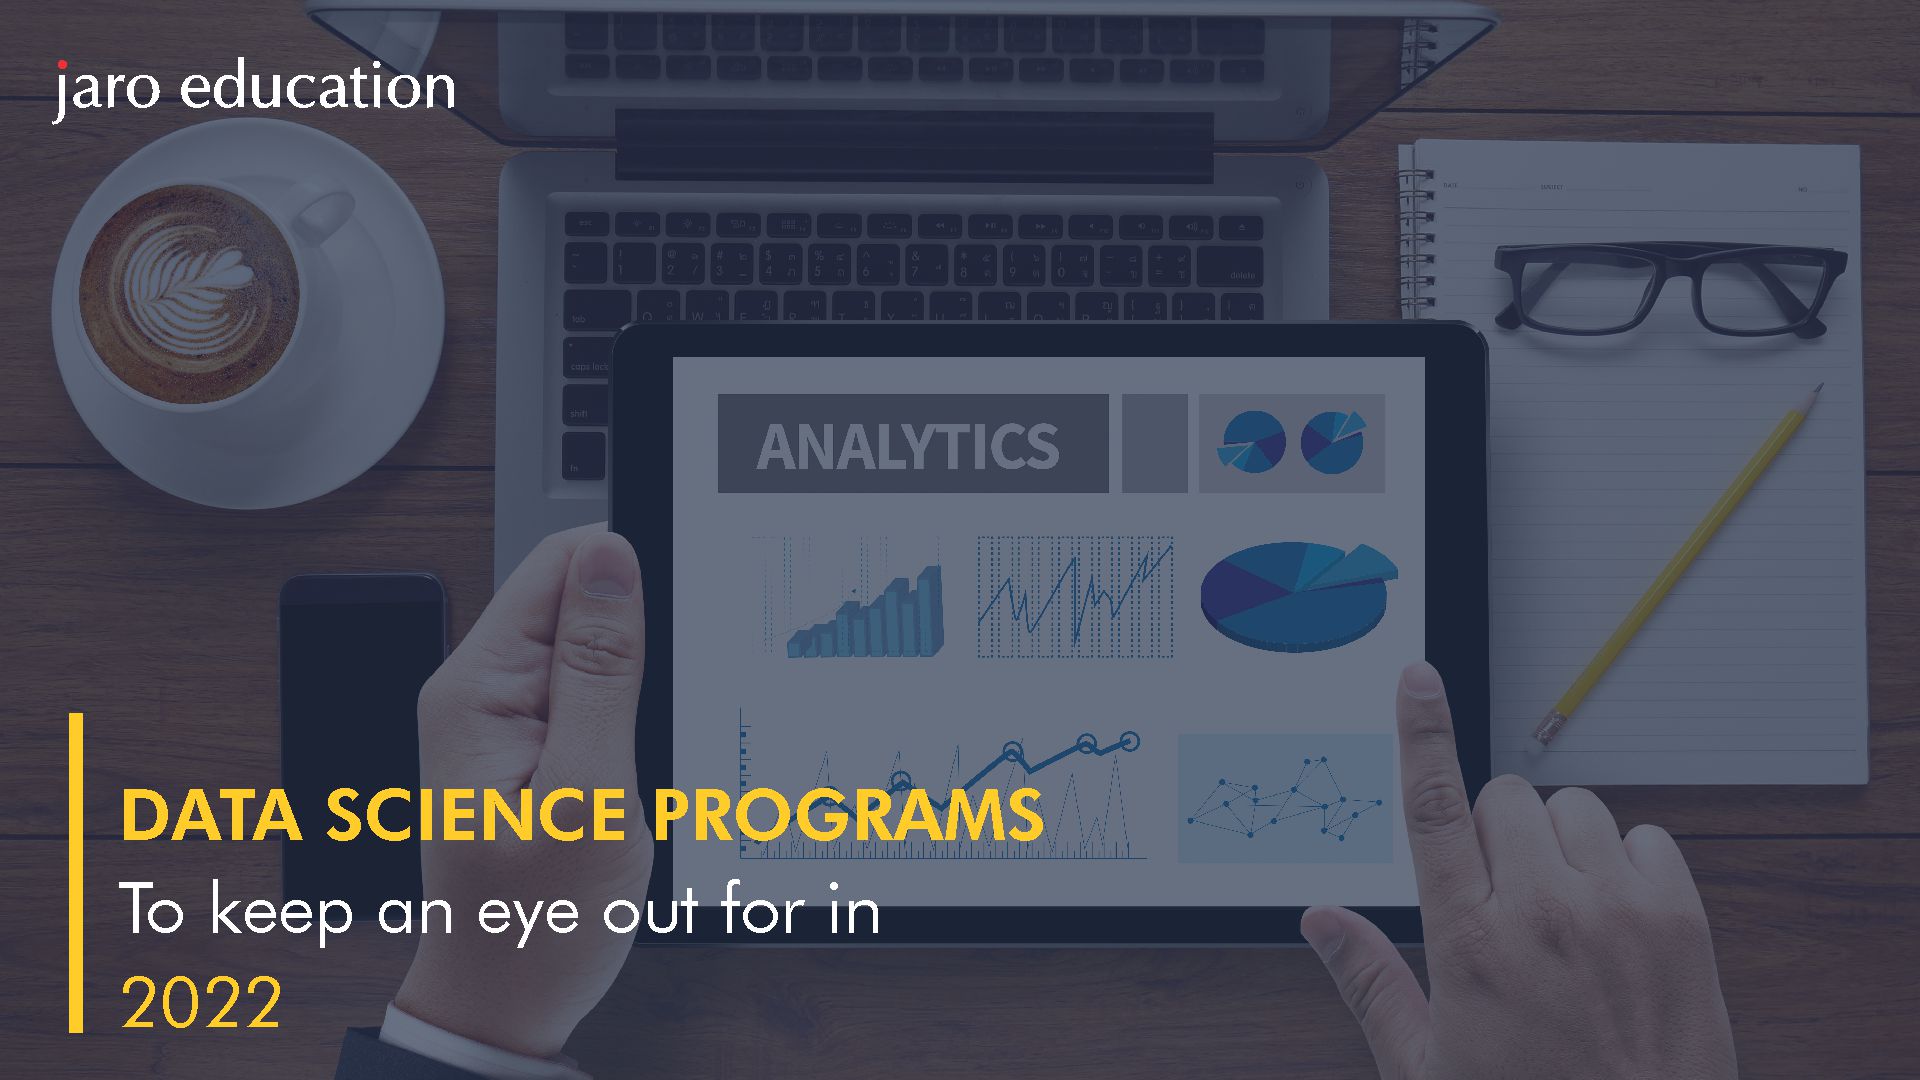 Data Science Programs to keep an eye on in 2022